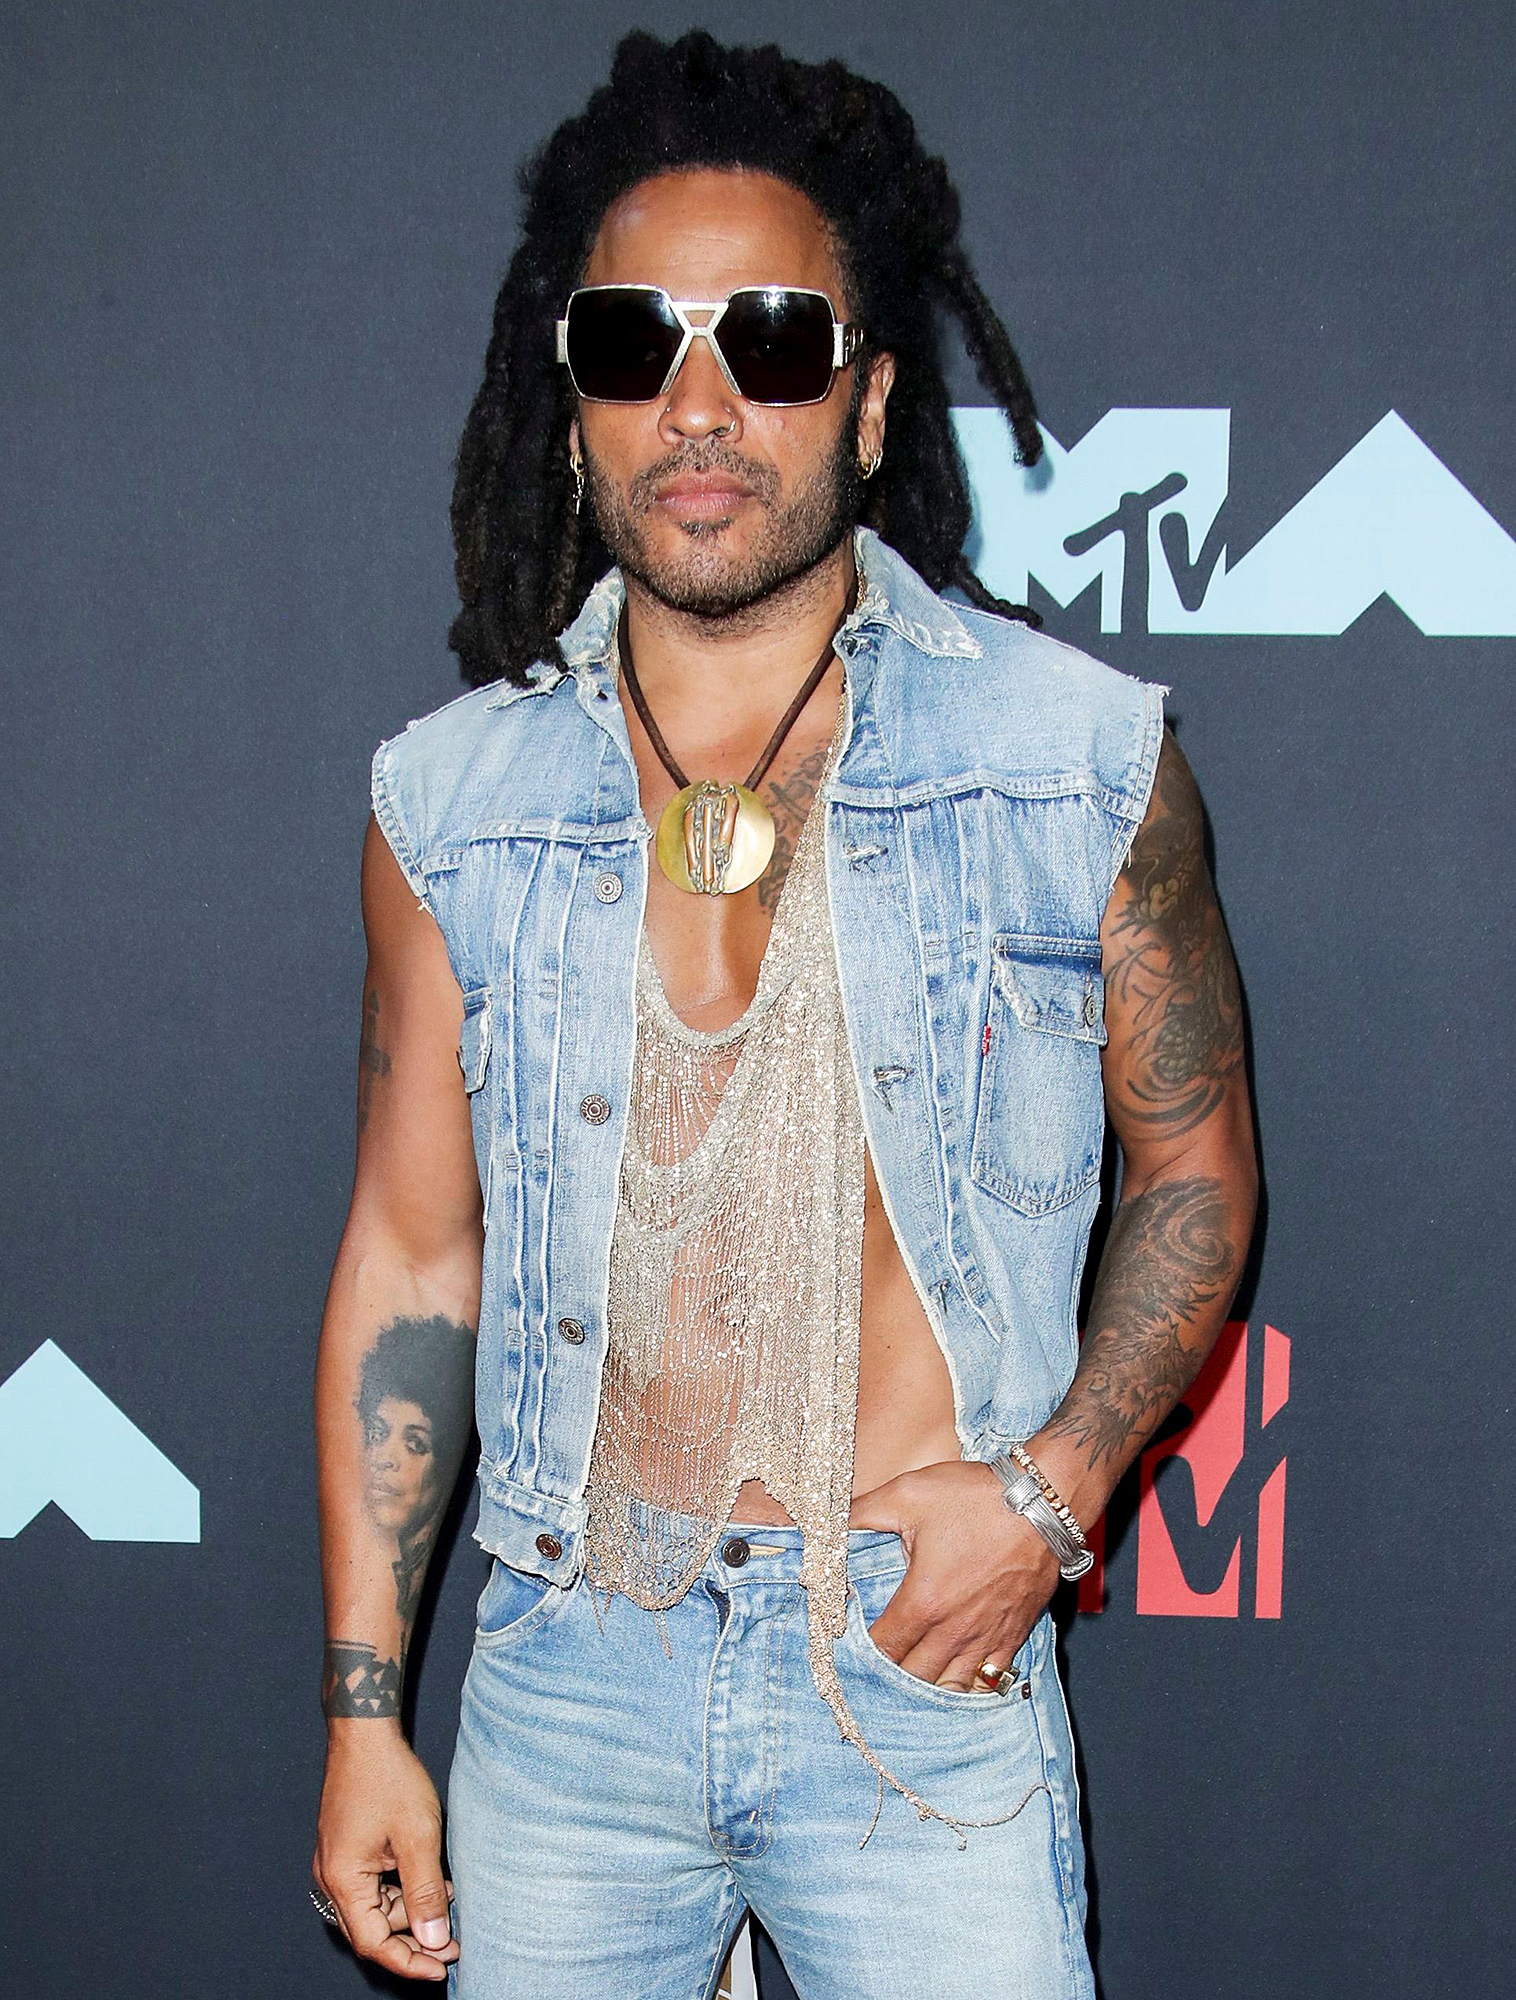 Lenny Kravitz Posts PSA to Find His Sunglasses, Shares Email